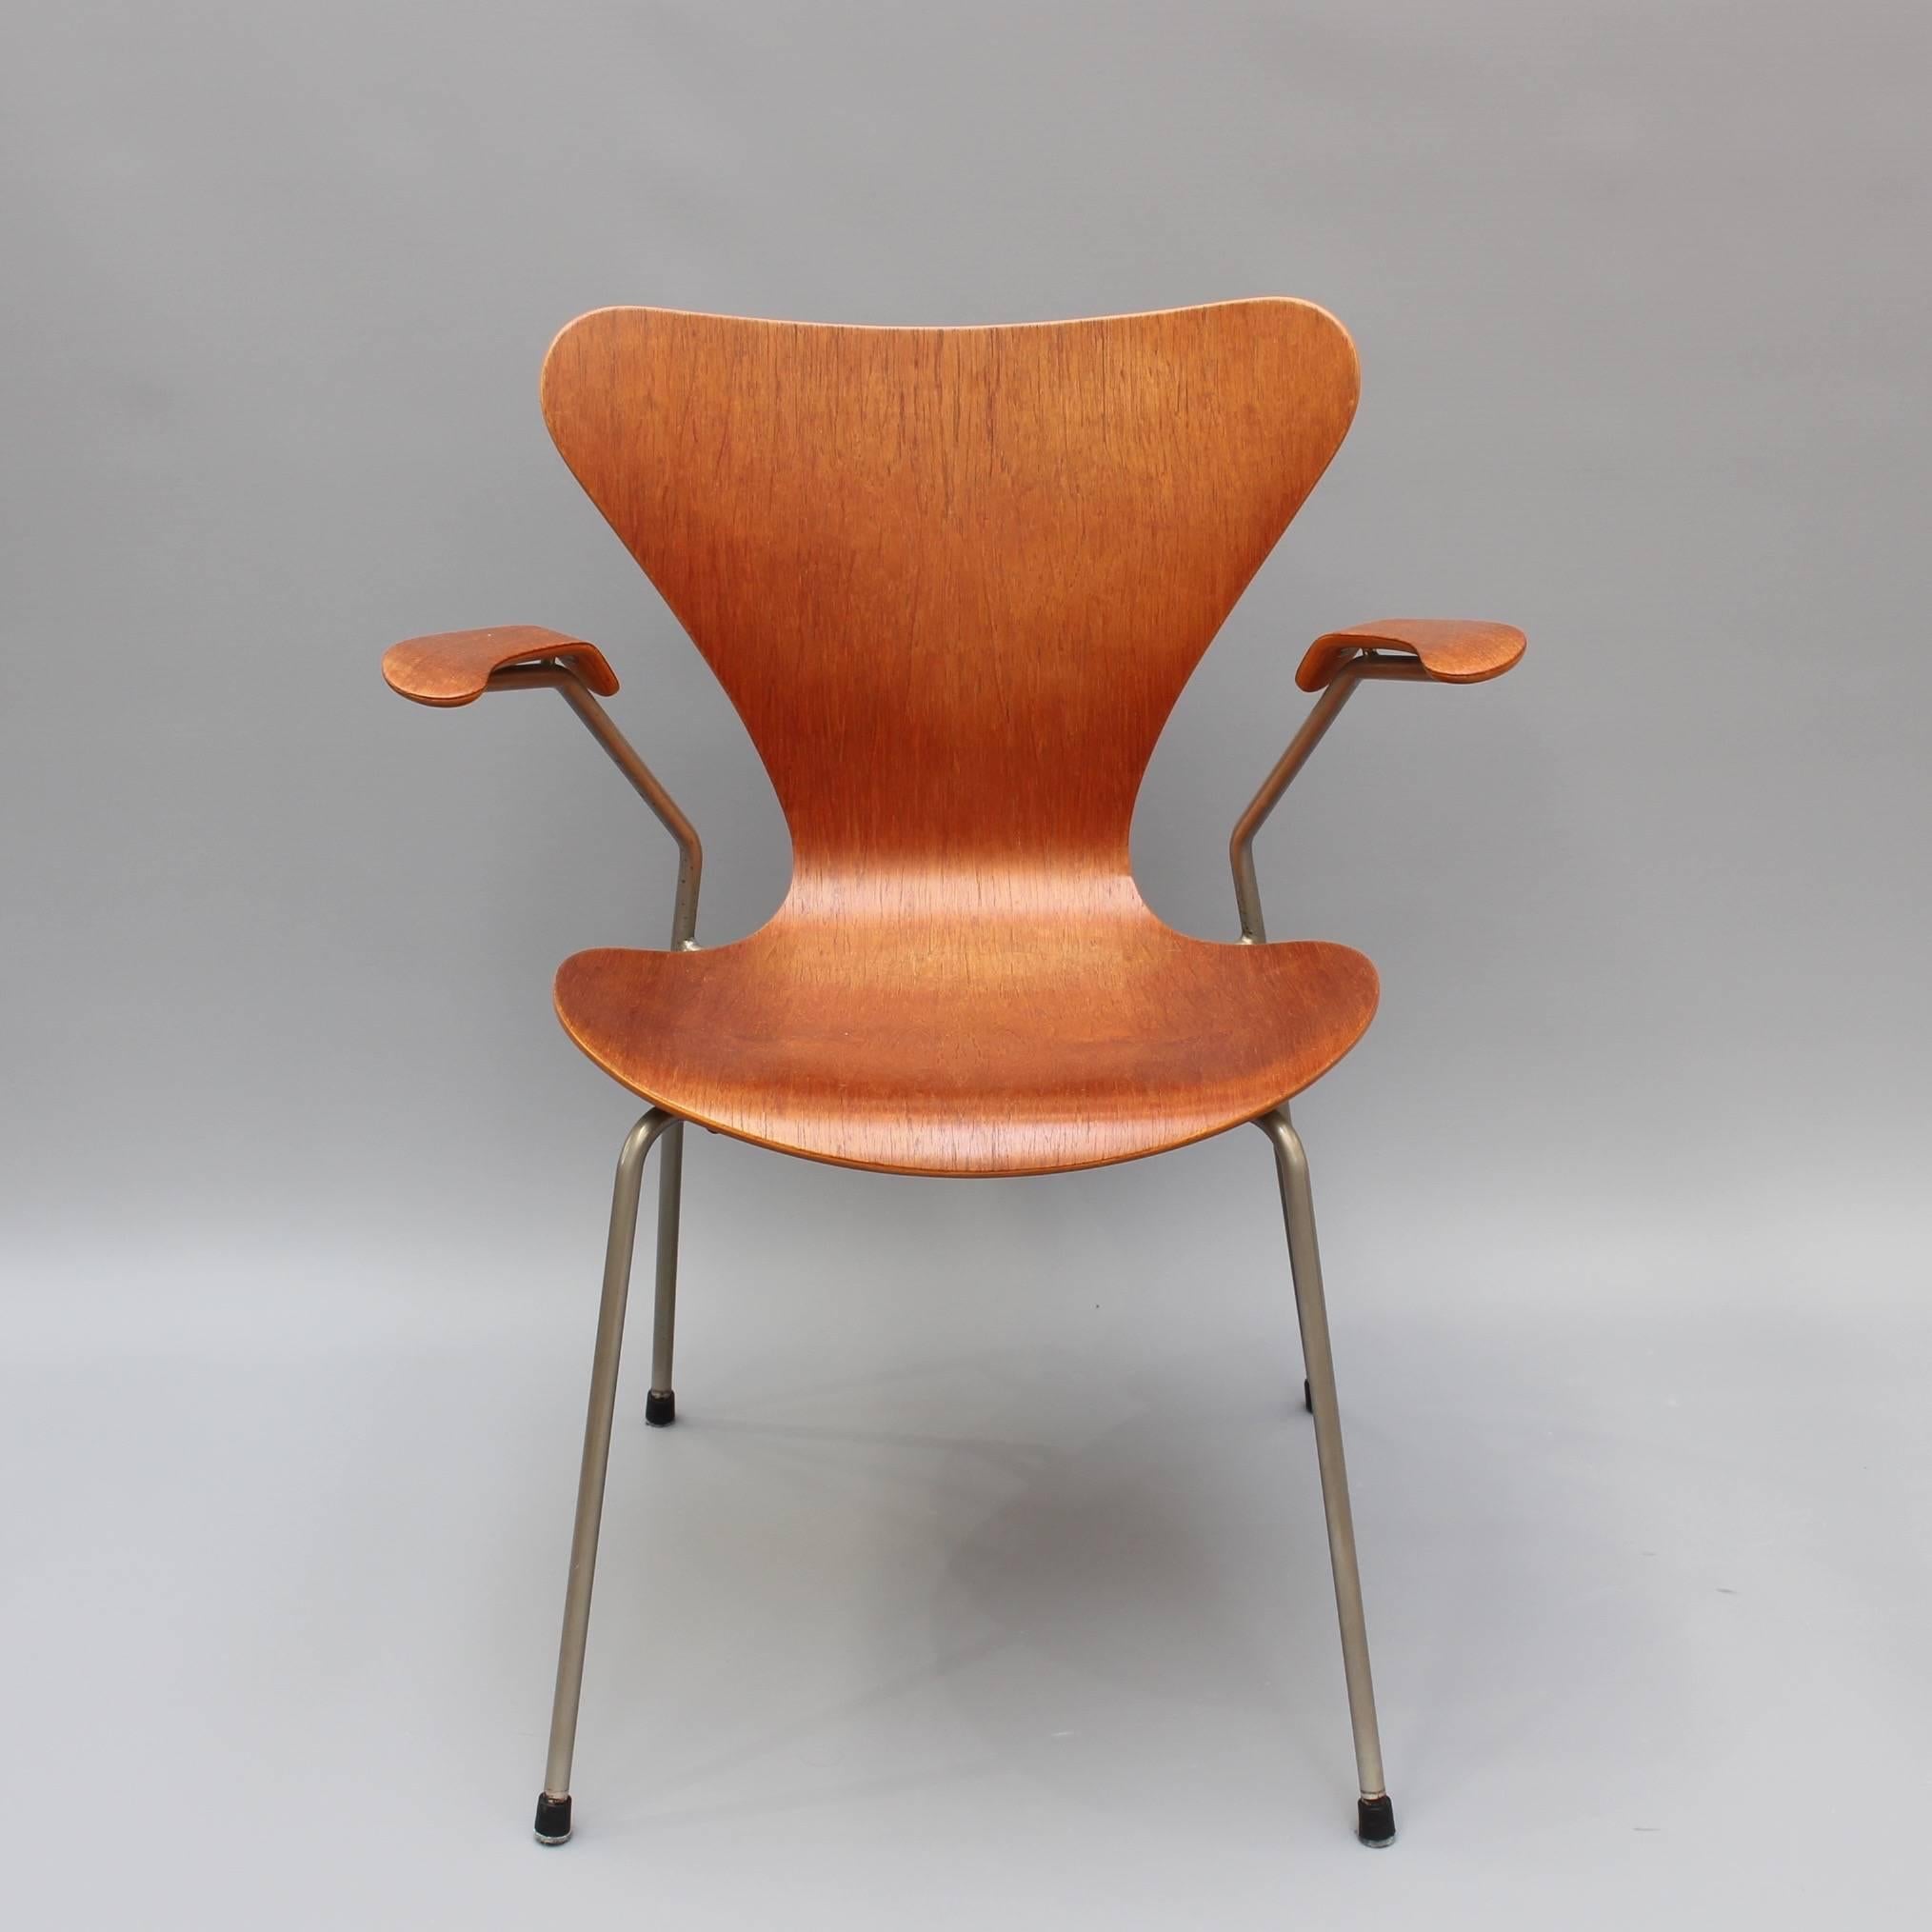 Single rosewood Arne Jacobsen Series 7 armchair for Fritz Hansen, circa 1960s. There's no mistaking the voluptuous hourglass form of Arne Jacobsen's 1955 Model 3107 chair, better known as the Series 7. Jacobsen's Series 7 chair was a paean to modern